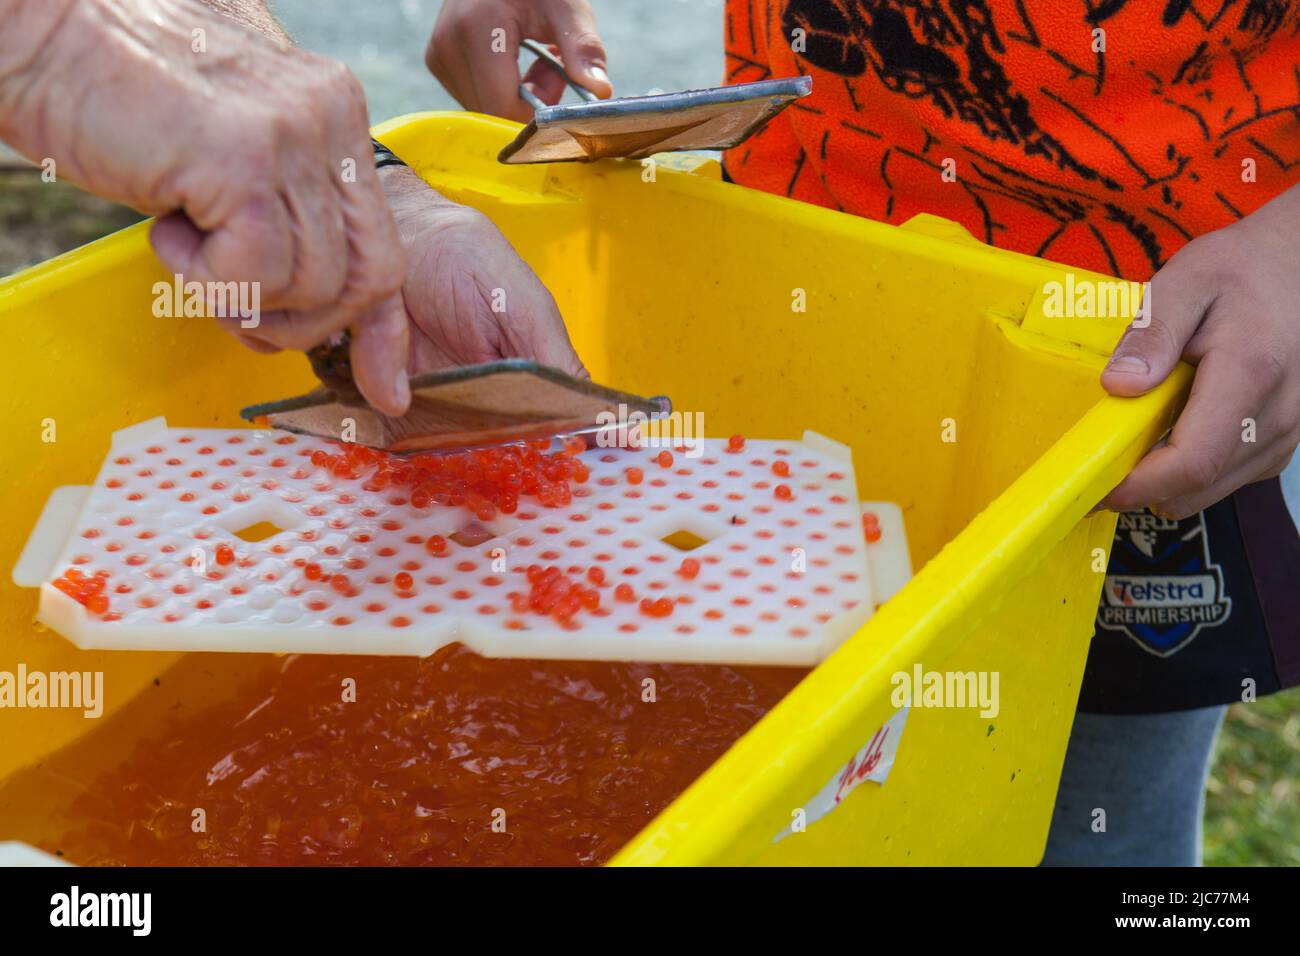 Life in New Zealand. Fishing, foraging, diving, gardening and sports. Salmon enhancement program, planting fertile Chinook Salmon eggs. Stock Photo